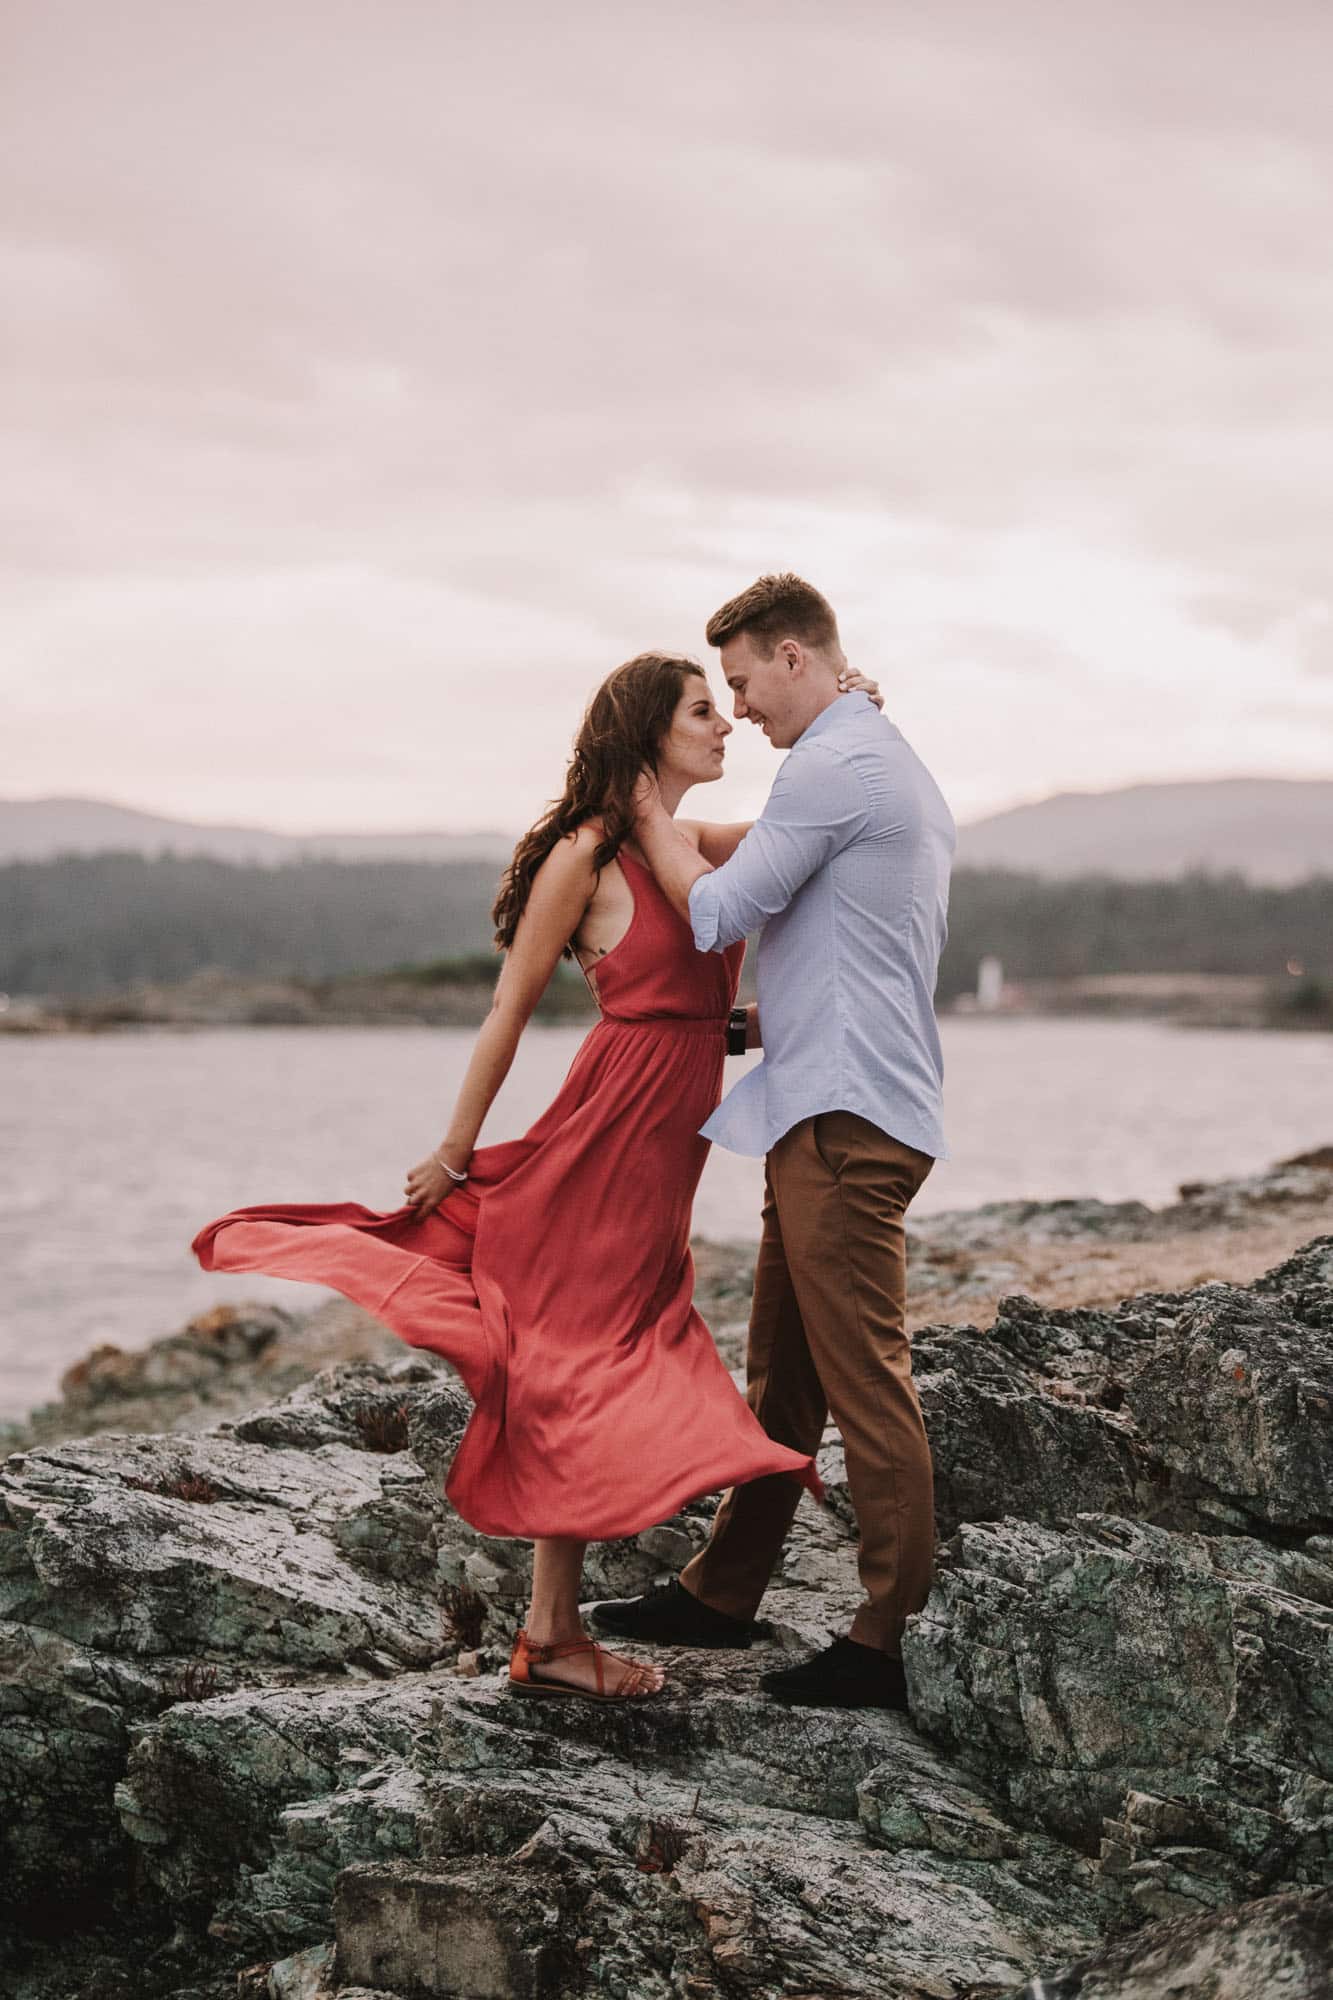 Victoria Engagement Photos Beach Forest Waterfall Vancouver Island Photographers